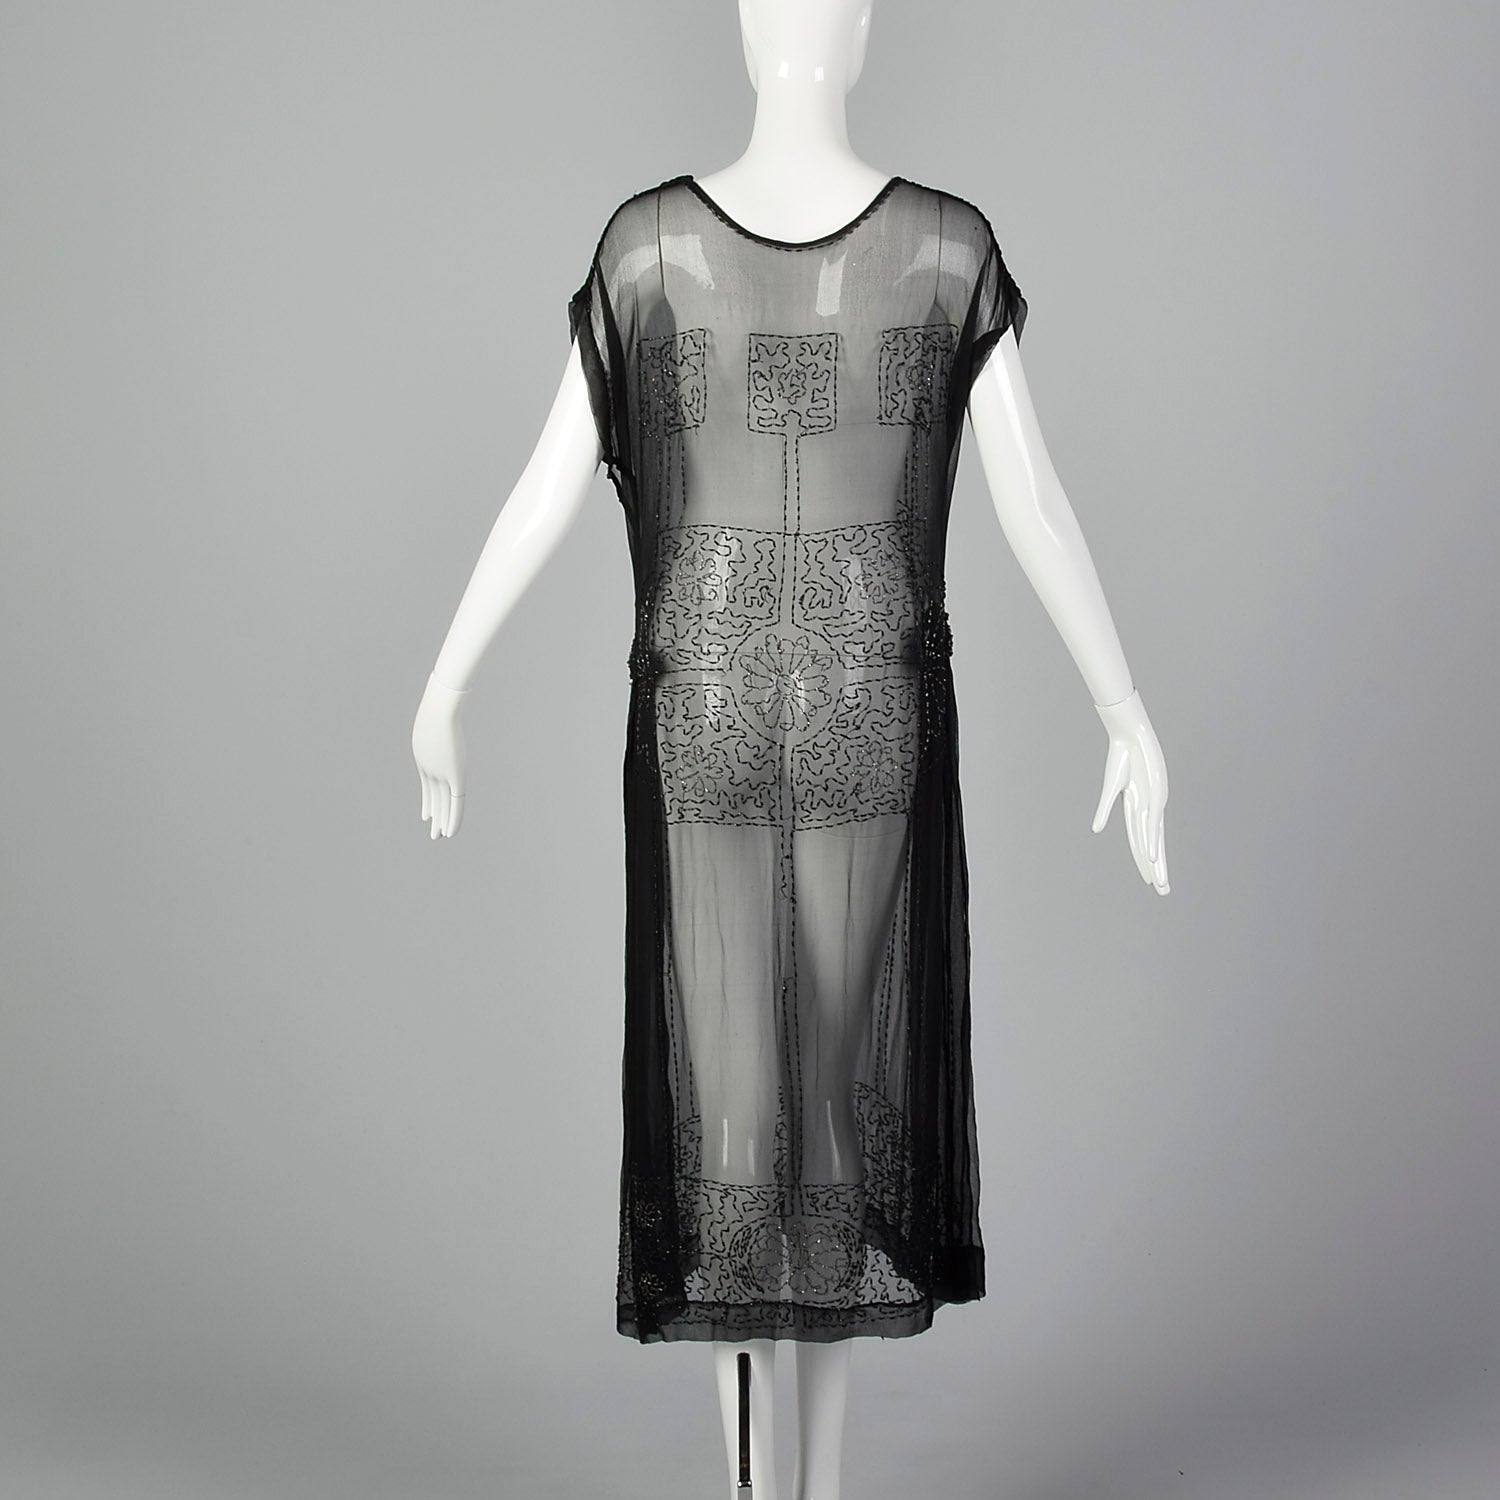 1920s Beaded Sheer Black Dress with Hip Sashes – Style & Salvage